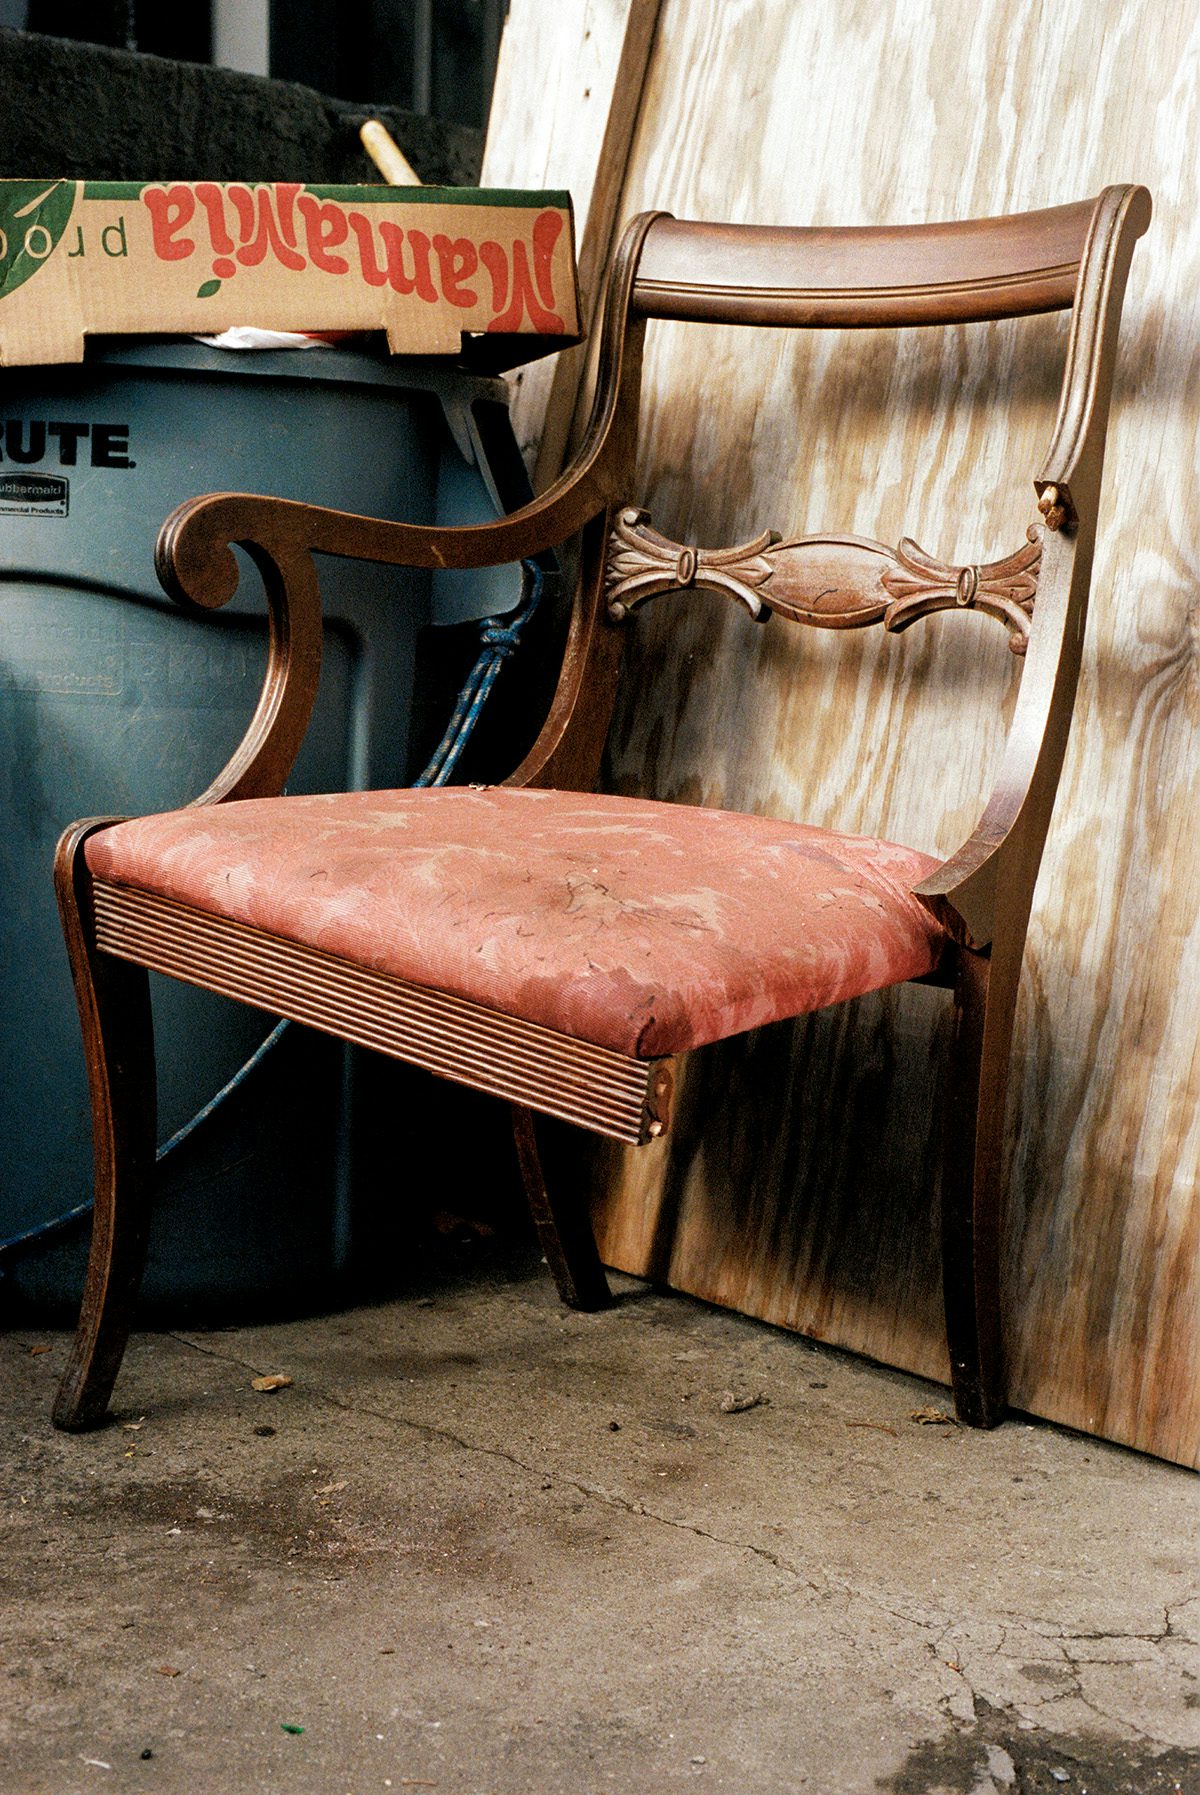 Image from Dream About Nothing by Bobby Doherty showing a wooden chair with one leg missing